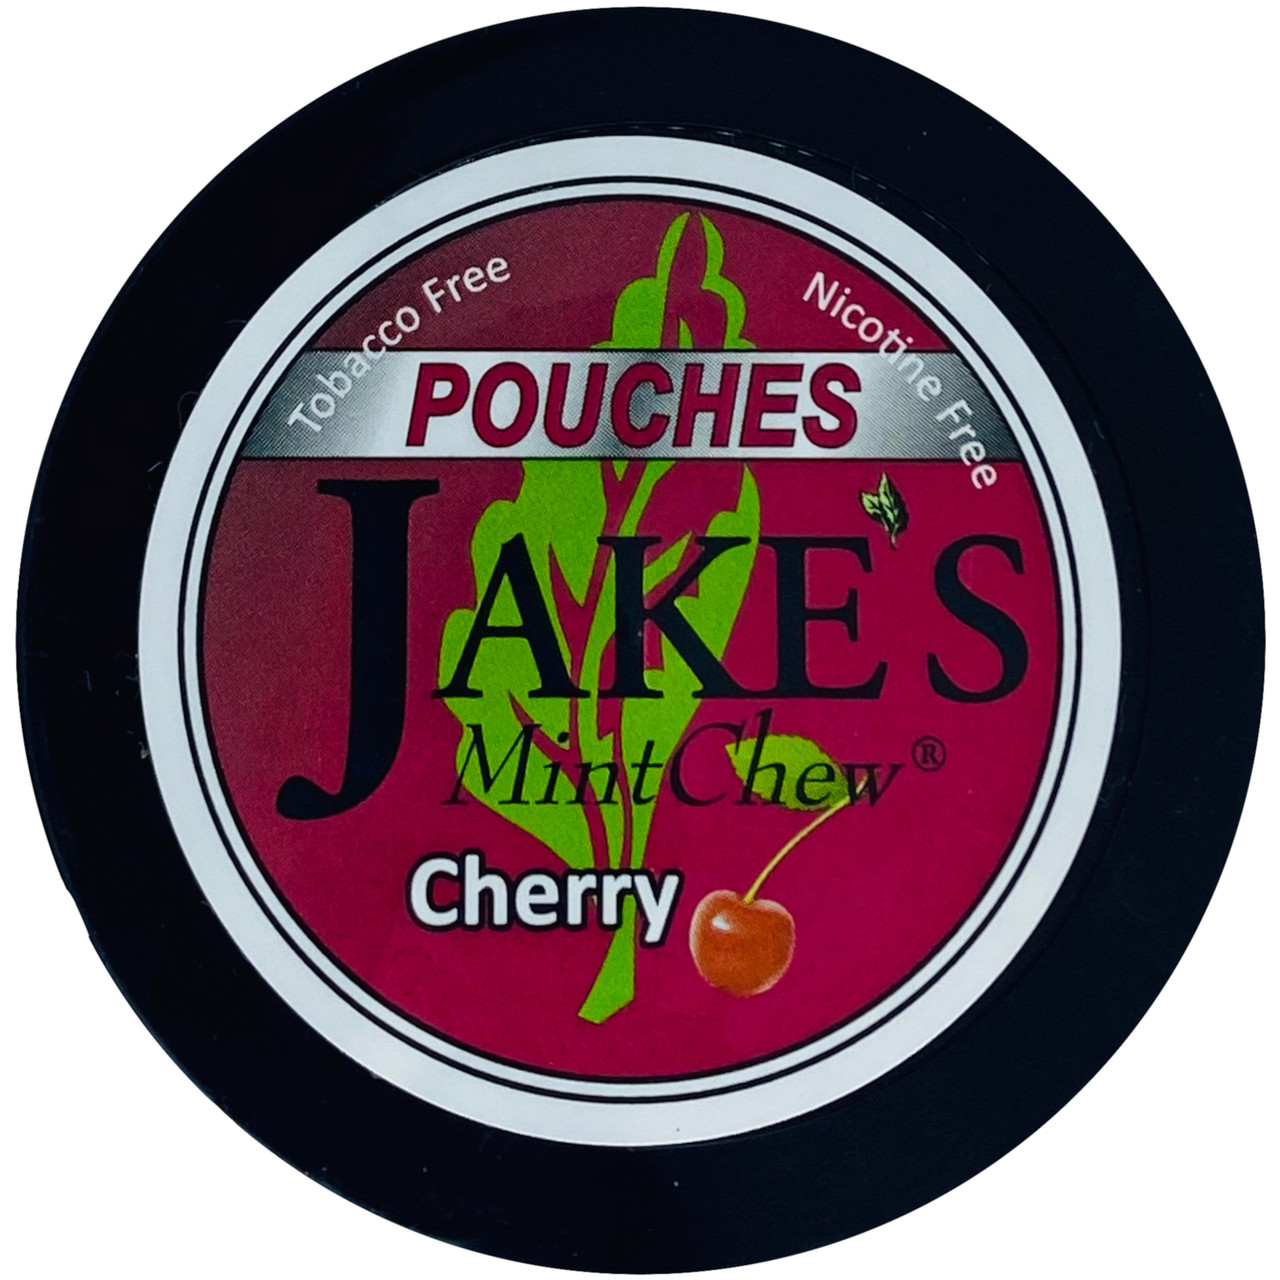 Jake's Mint Chew Pouches Cherry 1 Can